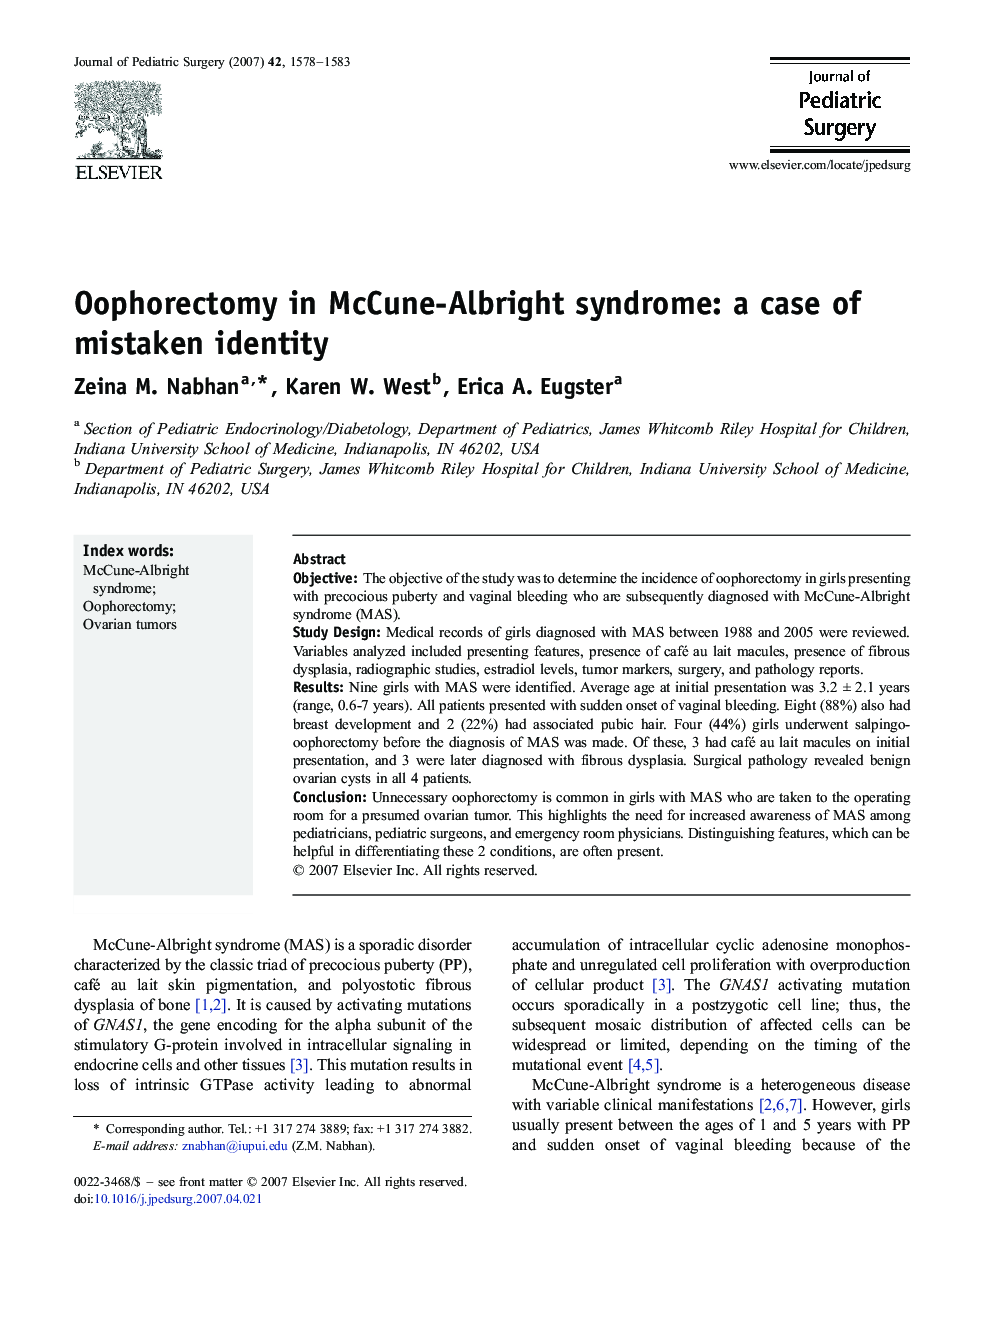 Oophorectomy in McCune-Albright syndrome: a case of mistaken identity